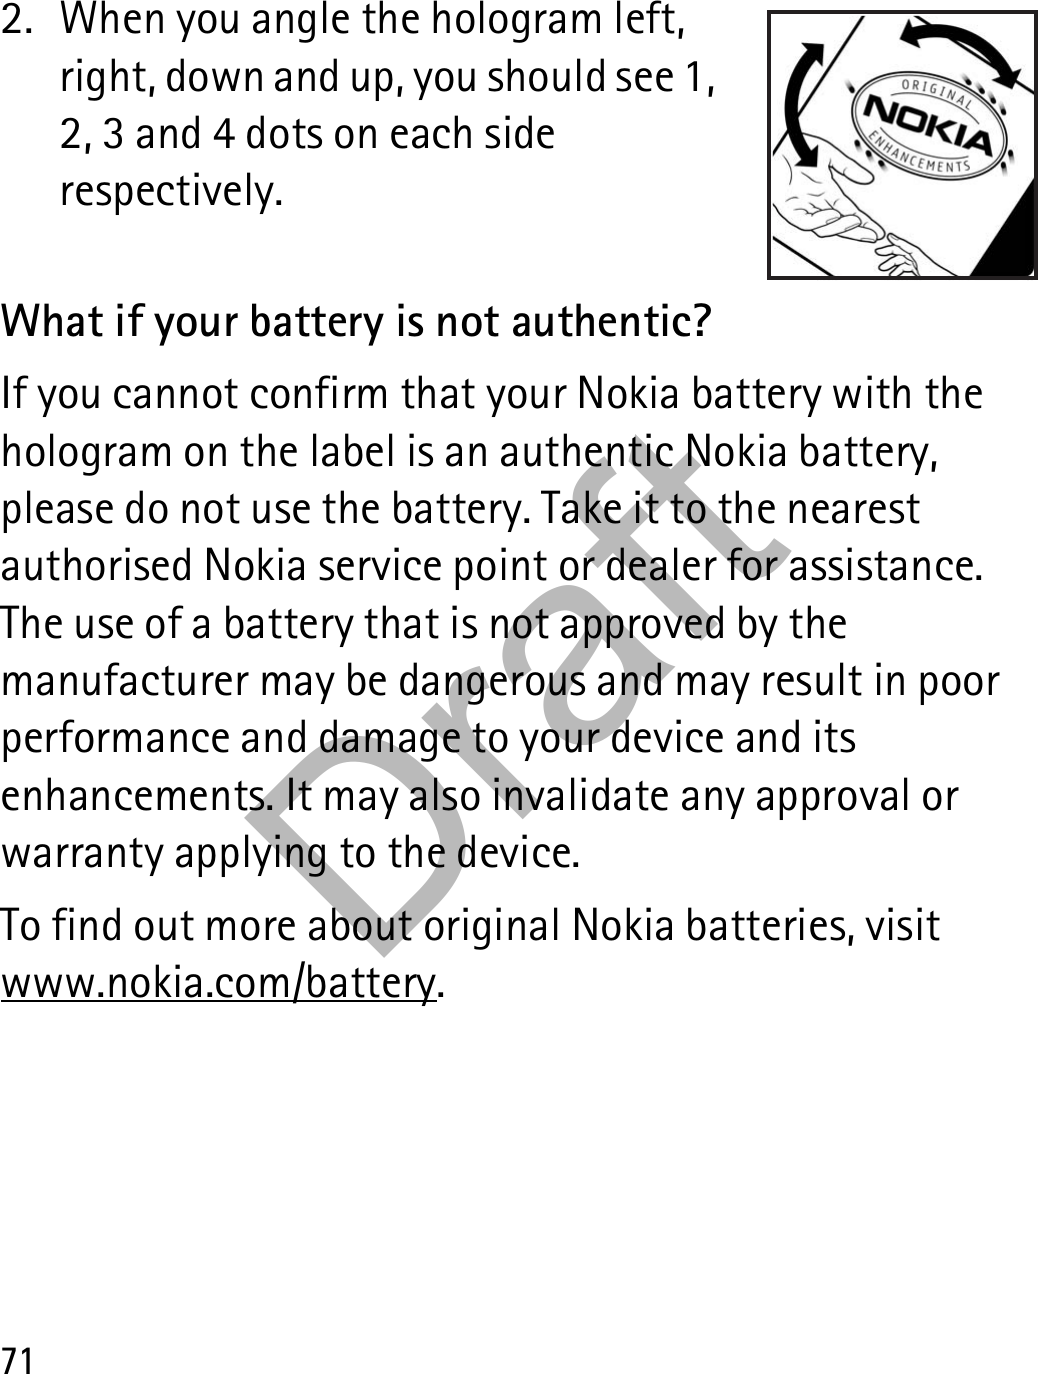 712. When you angle the hologram left, right, down and up, you should see 1, 2, 3 and 4 dots on each side respectively.What if your battery is not authentic?If you cannot confirm that your Nokia battery with the hologram on the label is an authentic Nokia battery, please do not use the battery. Take it to the nearest authorised Nokia service point or dealer for assistance. The use of a battery that is not approved by the manufacturer may be dangerous and may result in poor performance and damage to your device and its enhancements. It may also invalidate any approval or warranty applying to the device.To find out more about original Nokia batteries, visit www.nokia.com/battery.Draft